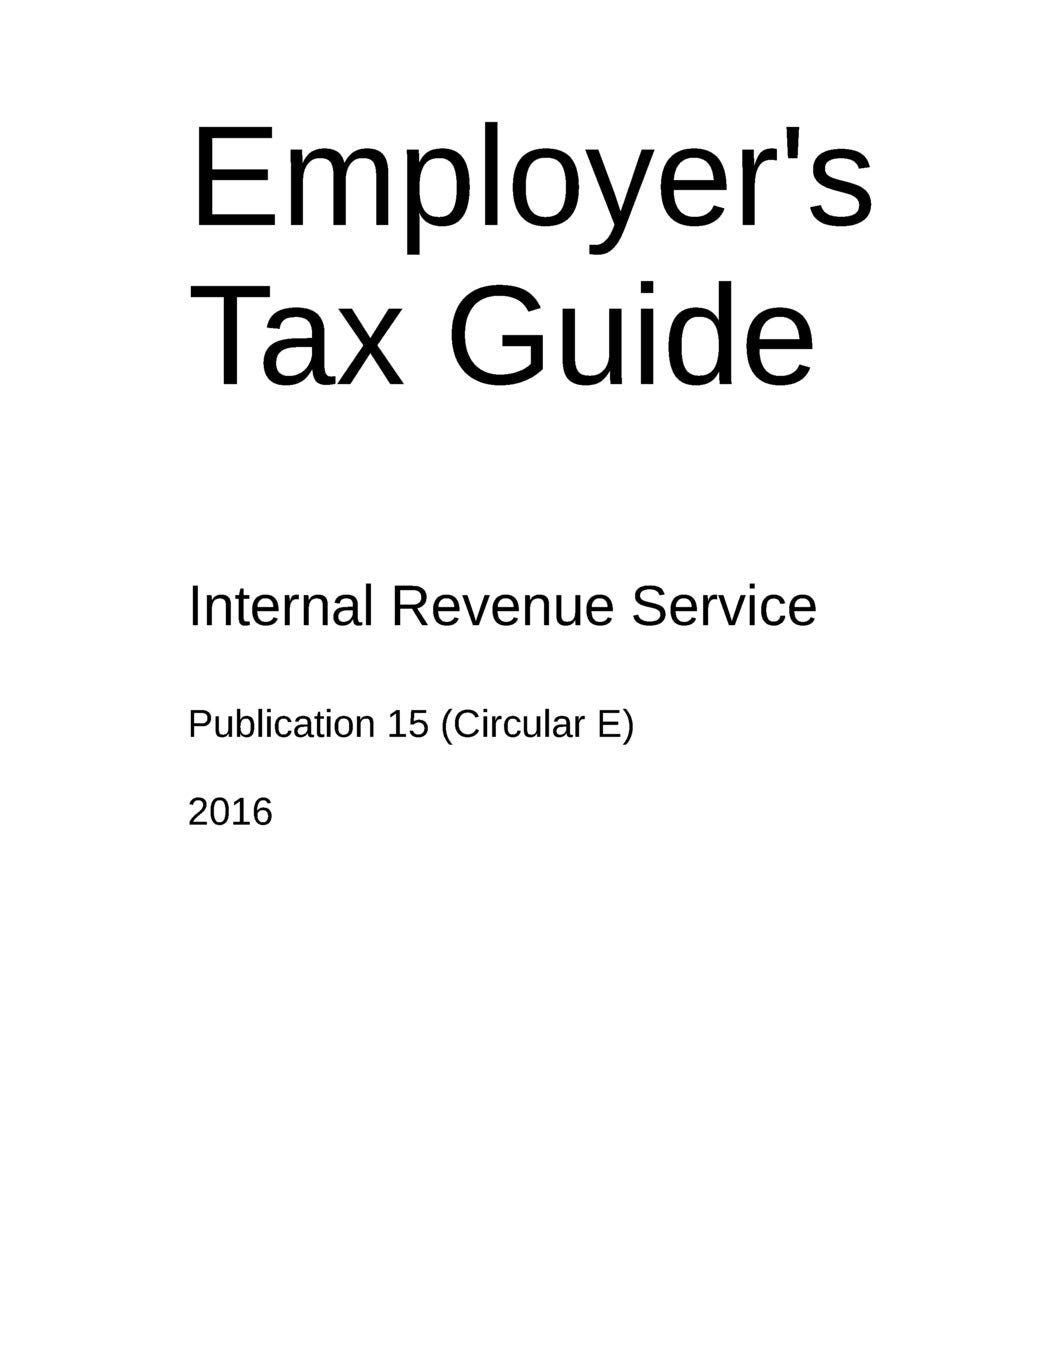 [DOWNLOAD]Employer’s Tax Guide Publication 15 (Circular E)x by